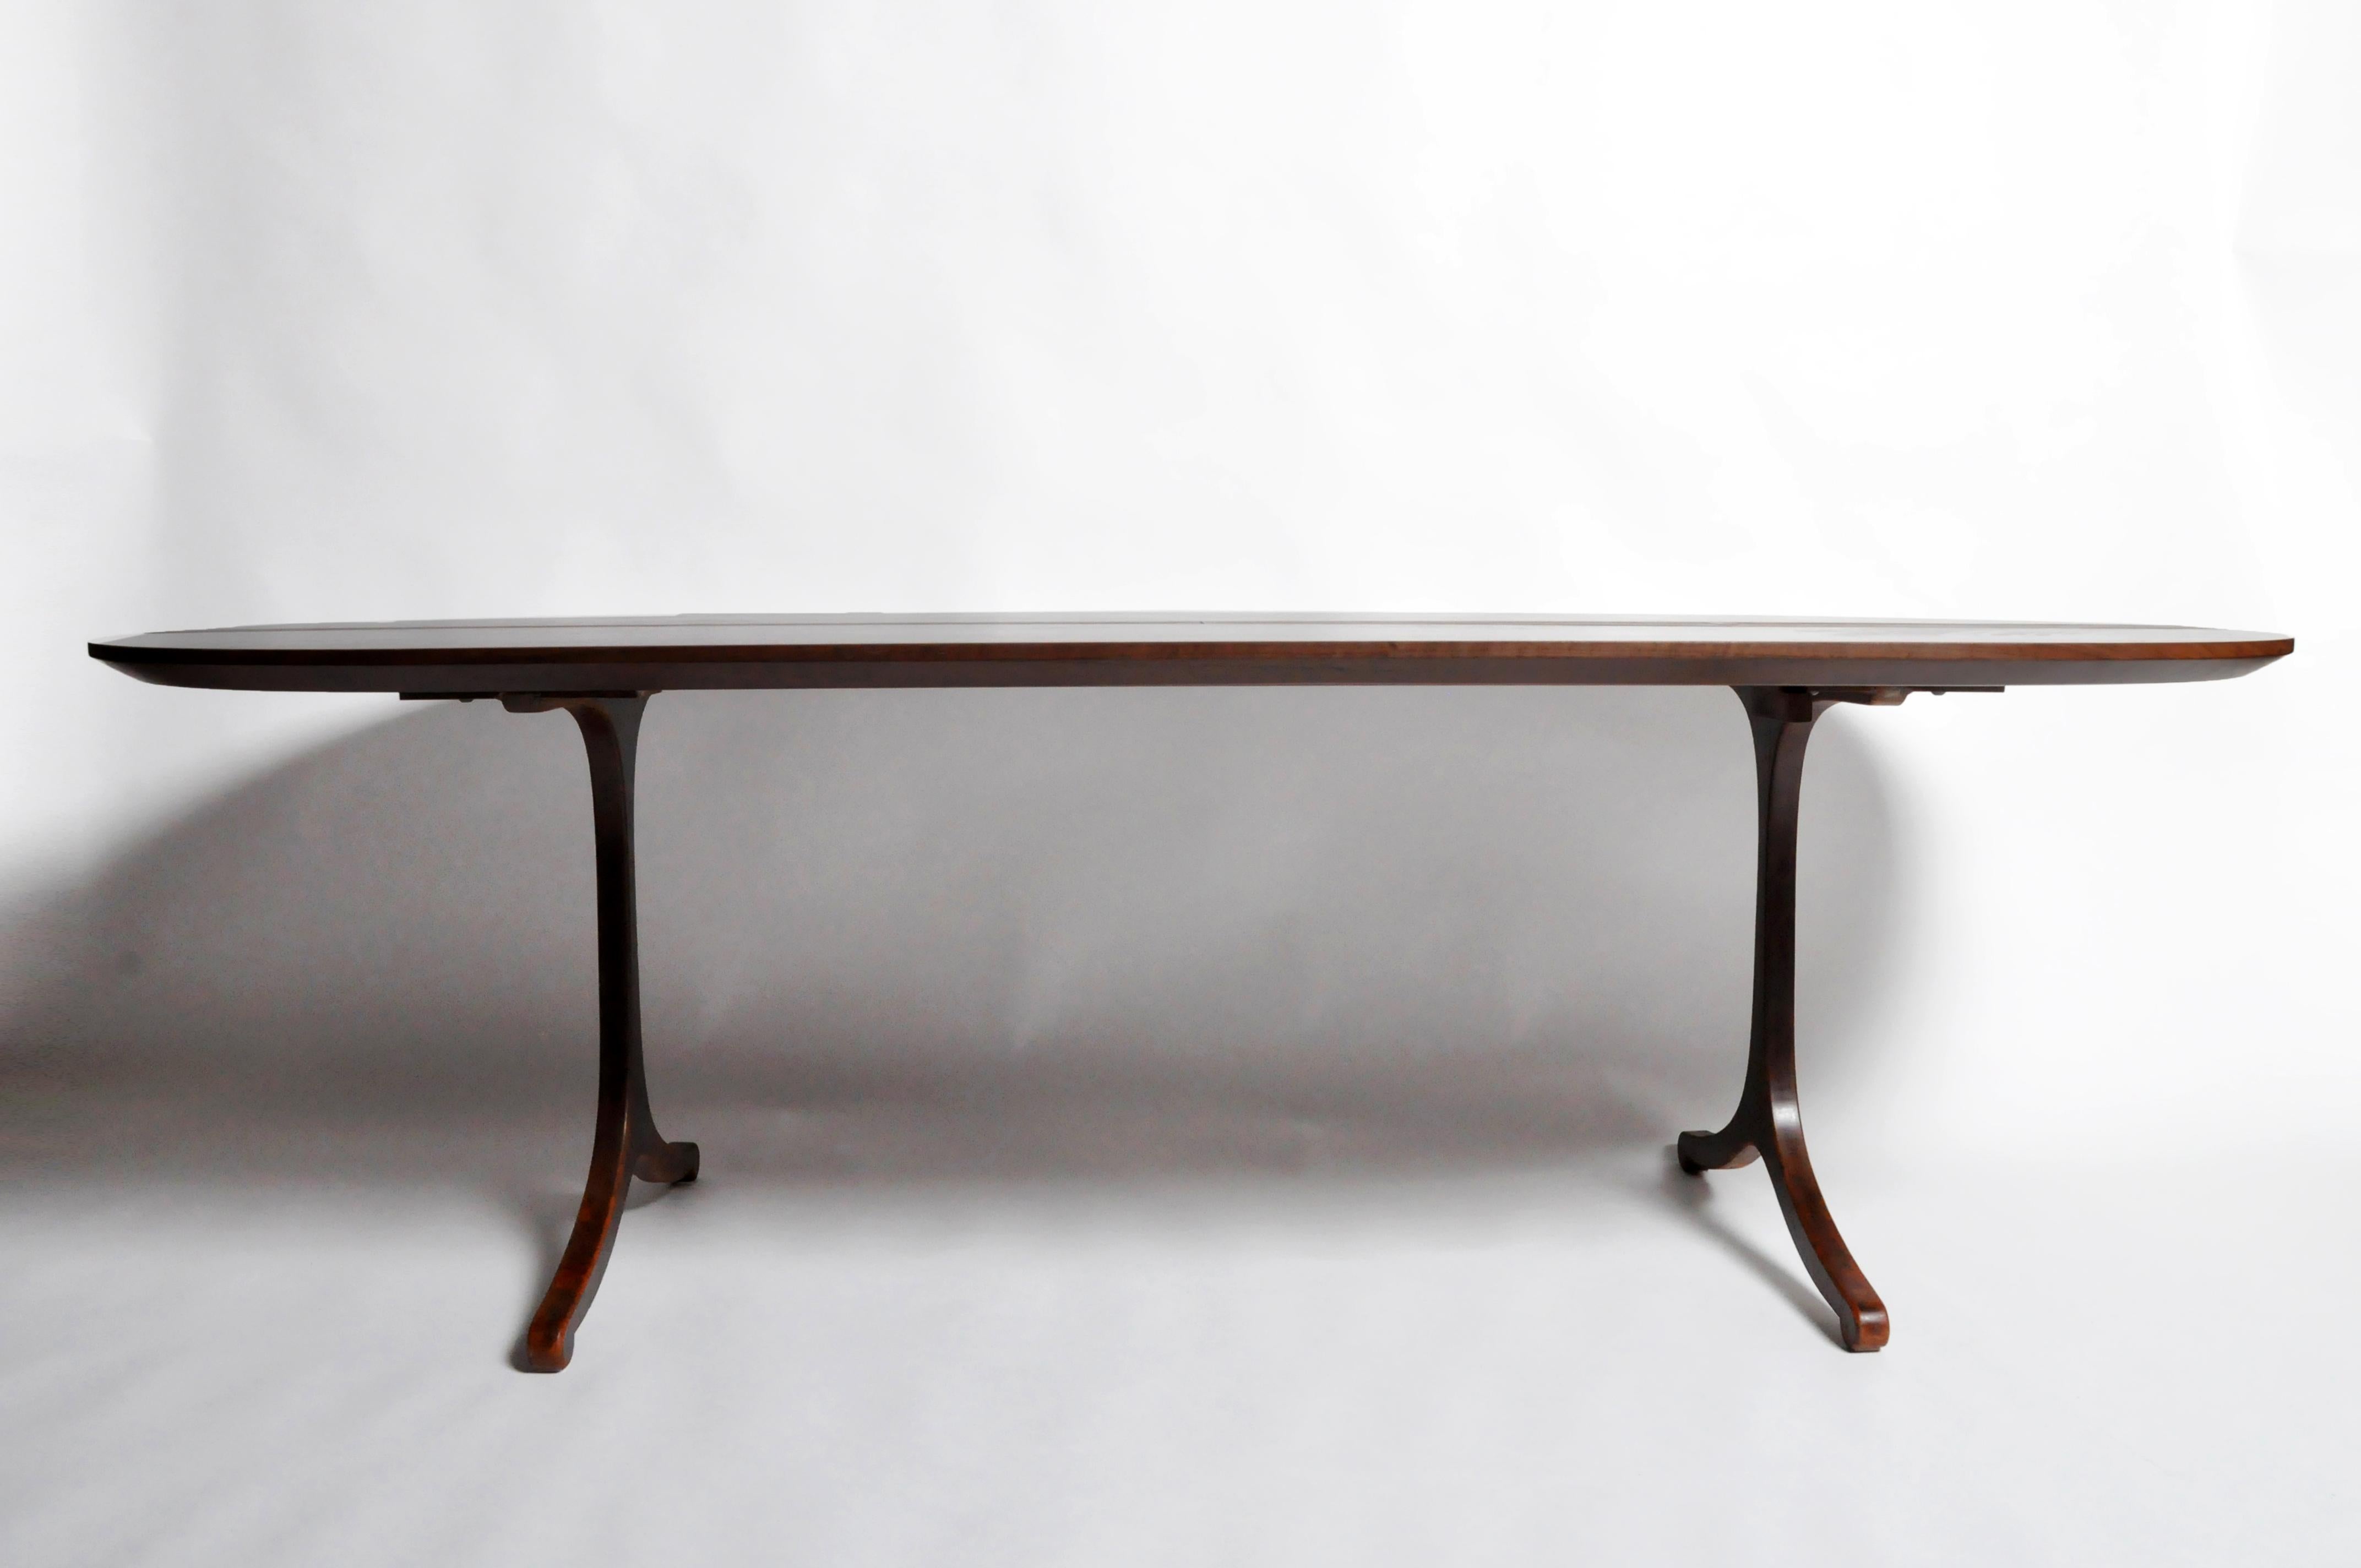 Steel Custom Walnut Table by Modern Industry for the Golden Triangle Chicago